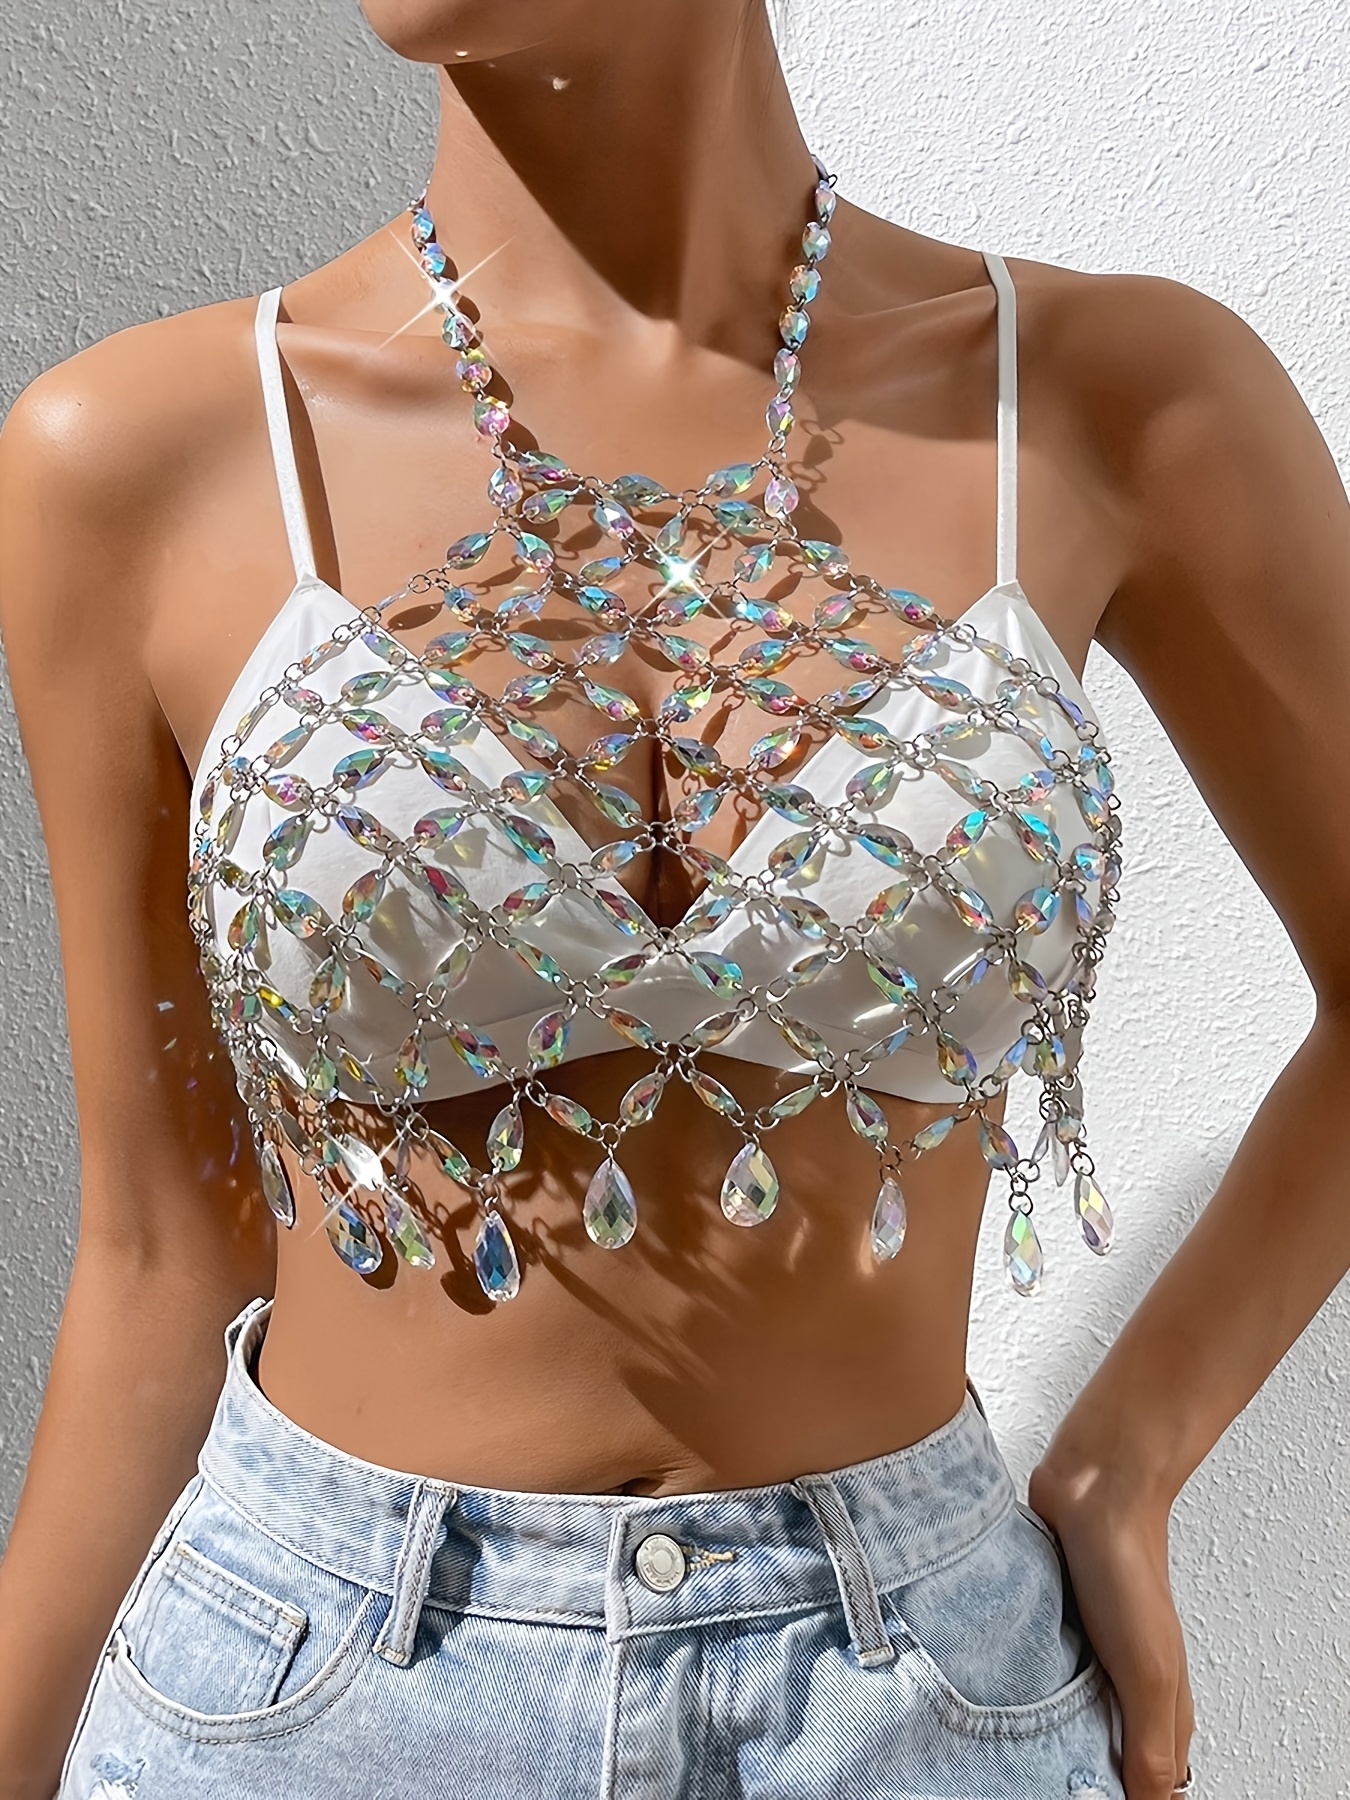 Sparkling Rhinestone O Ring Open Back Chainmail Halter Bra Top